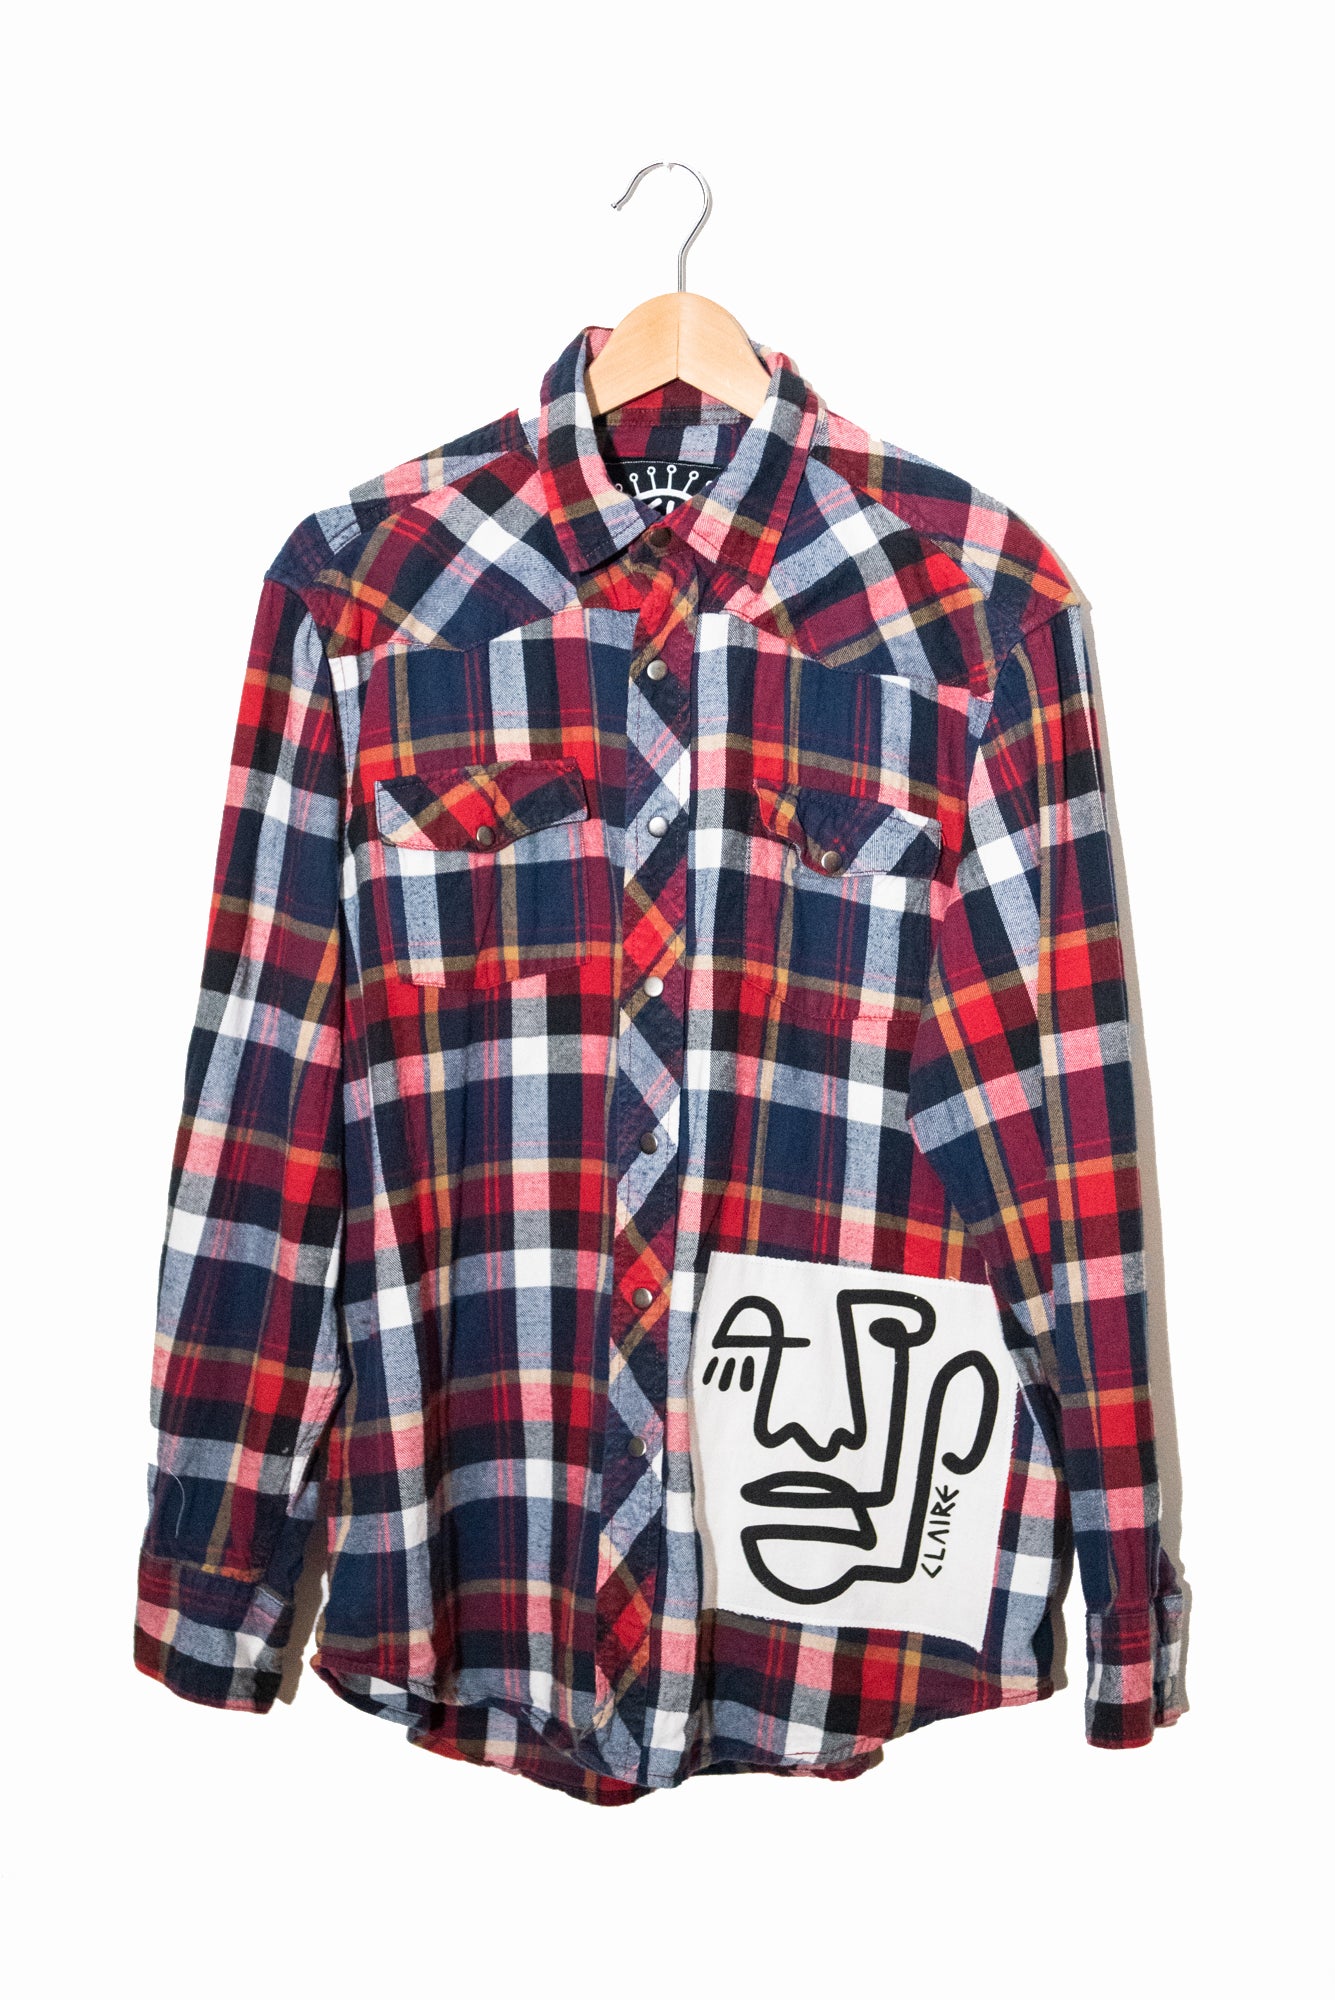 Navy, Red, White & Gold Plaid Button-Up (L)